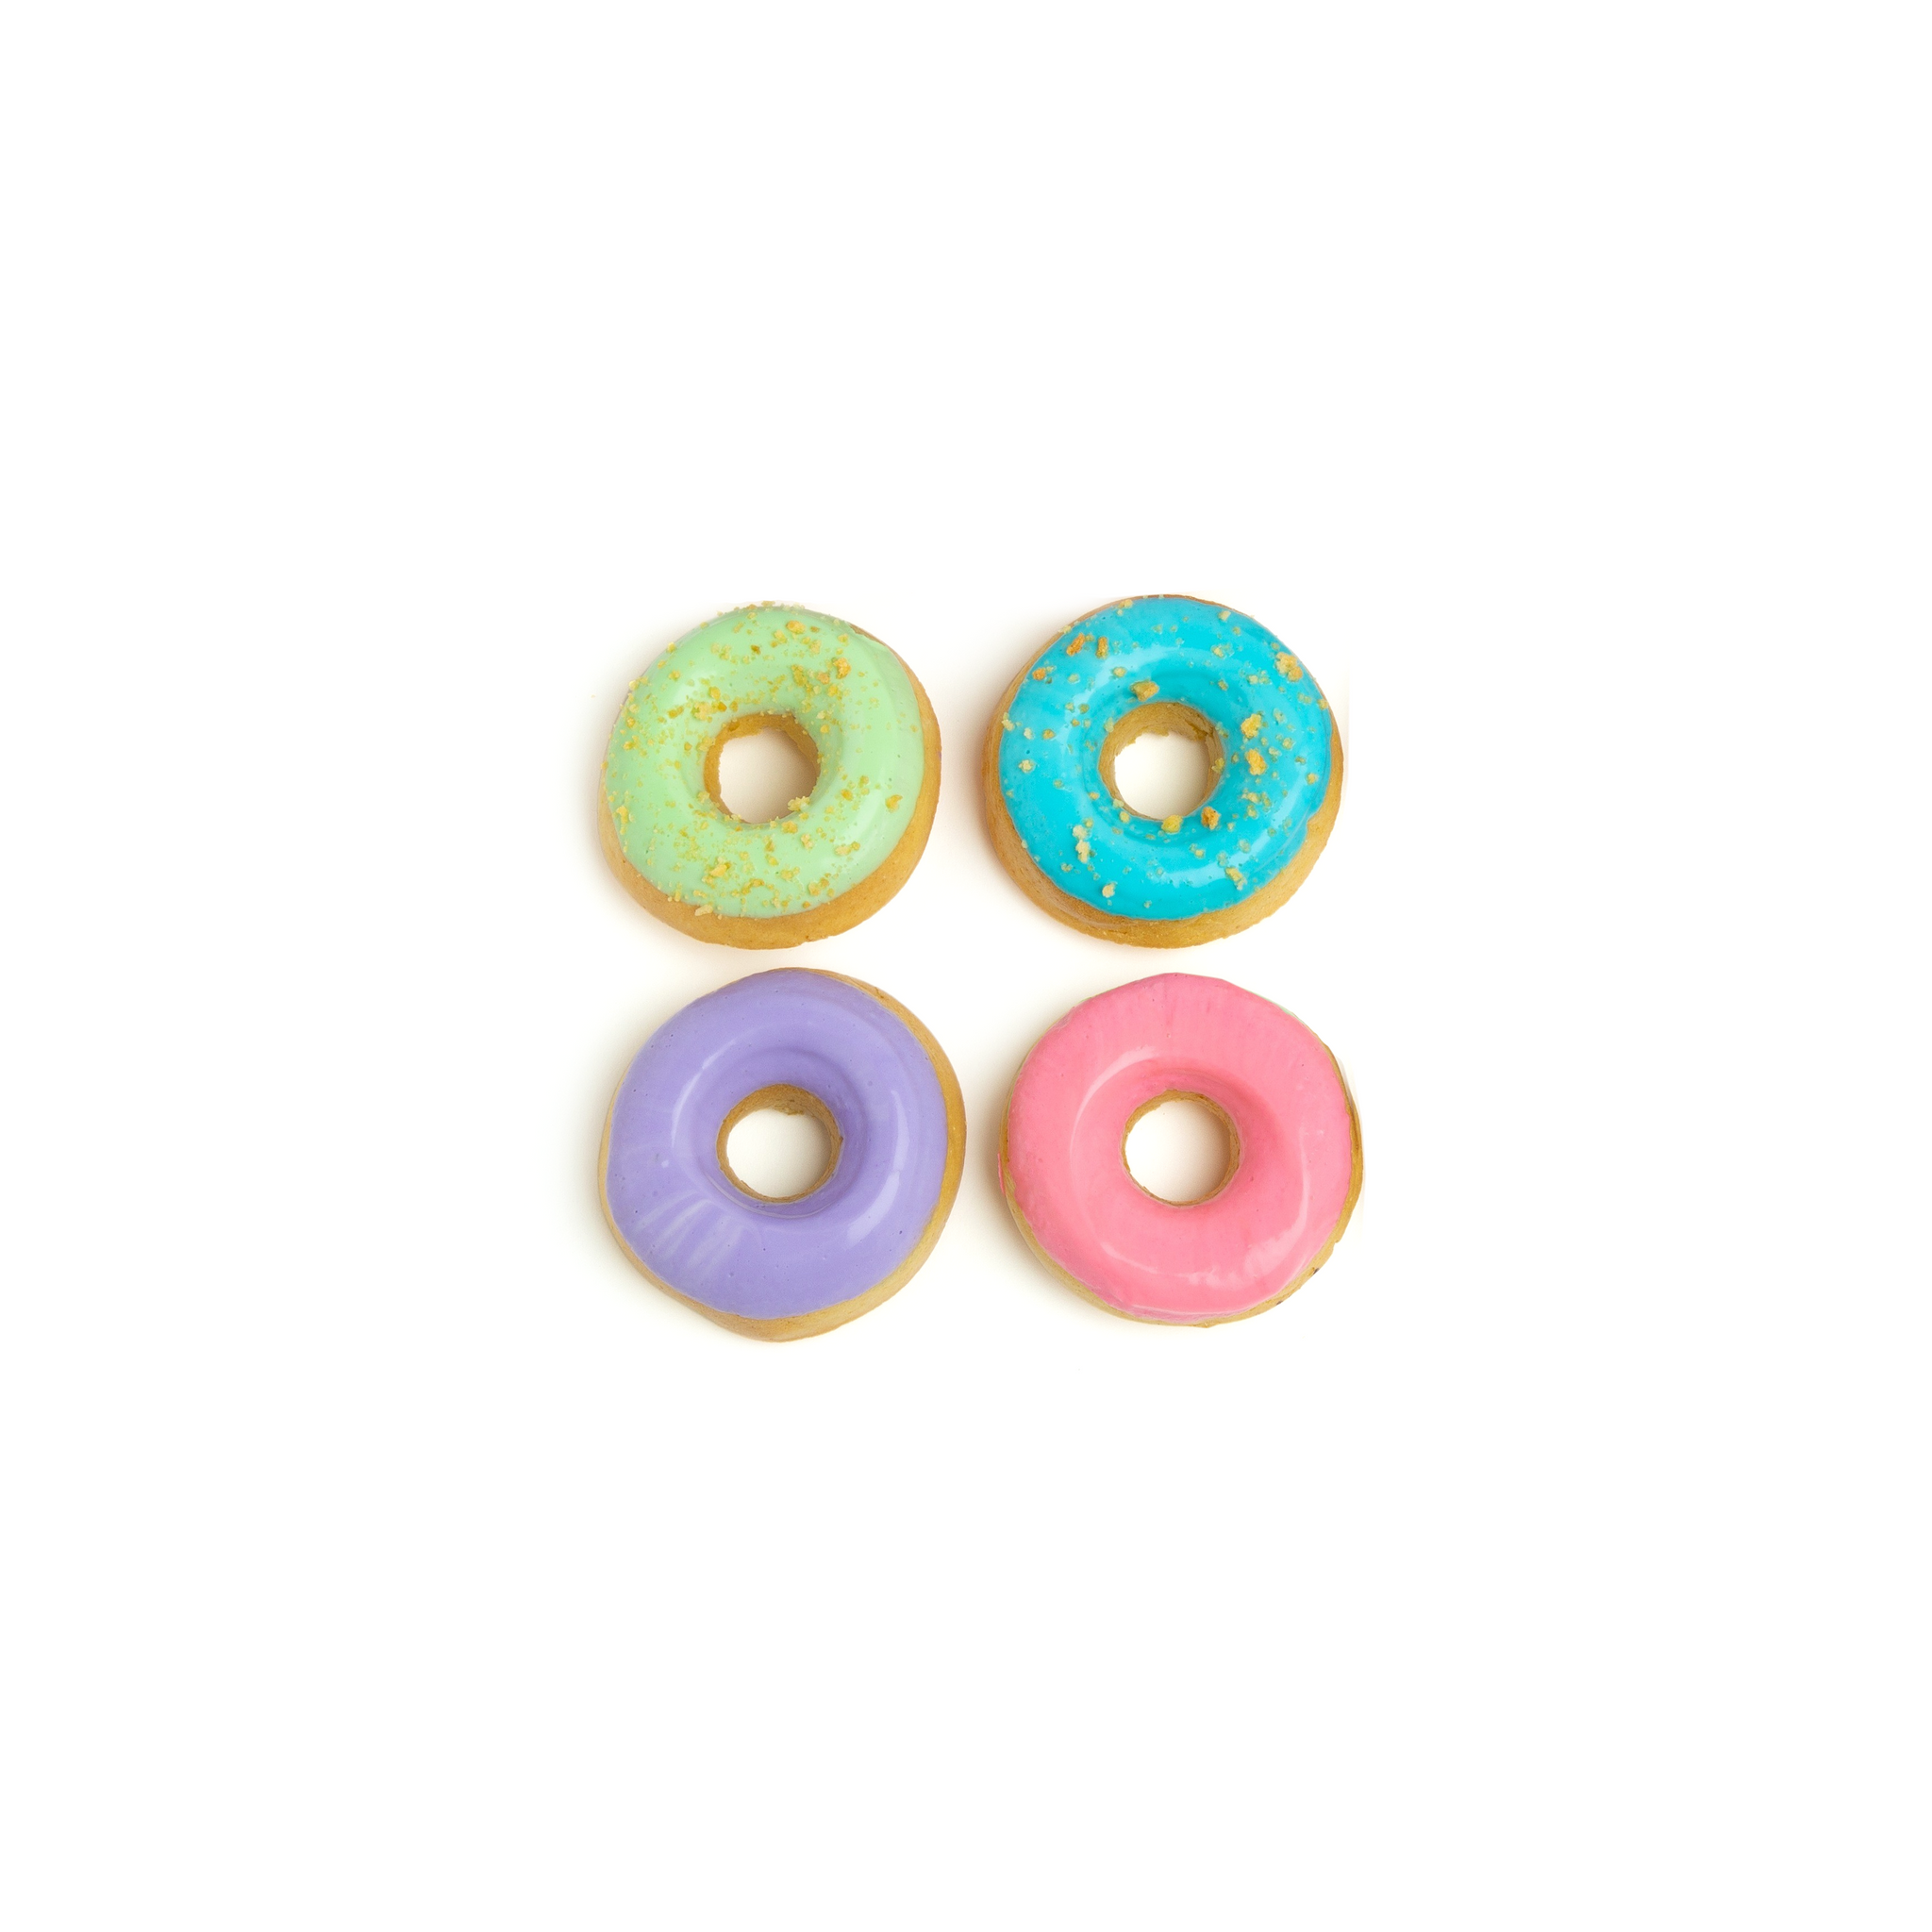 Donuts for Dogs (4 pcs) - MultiColor